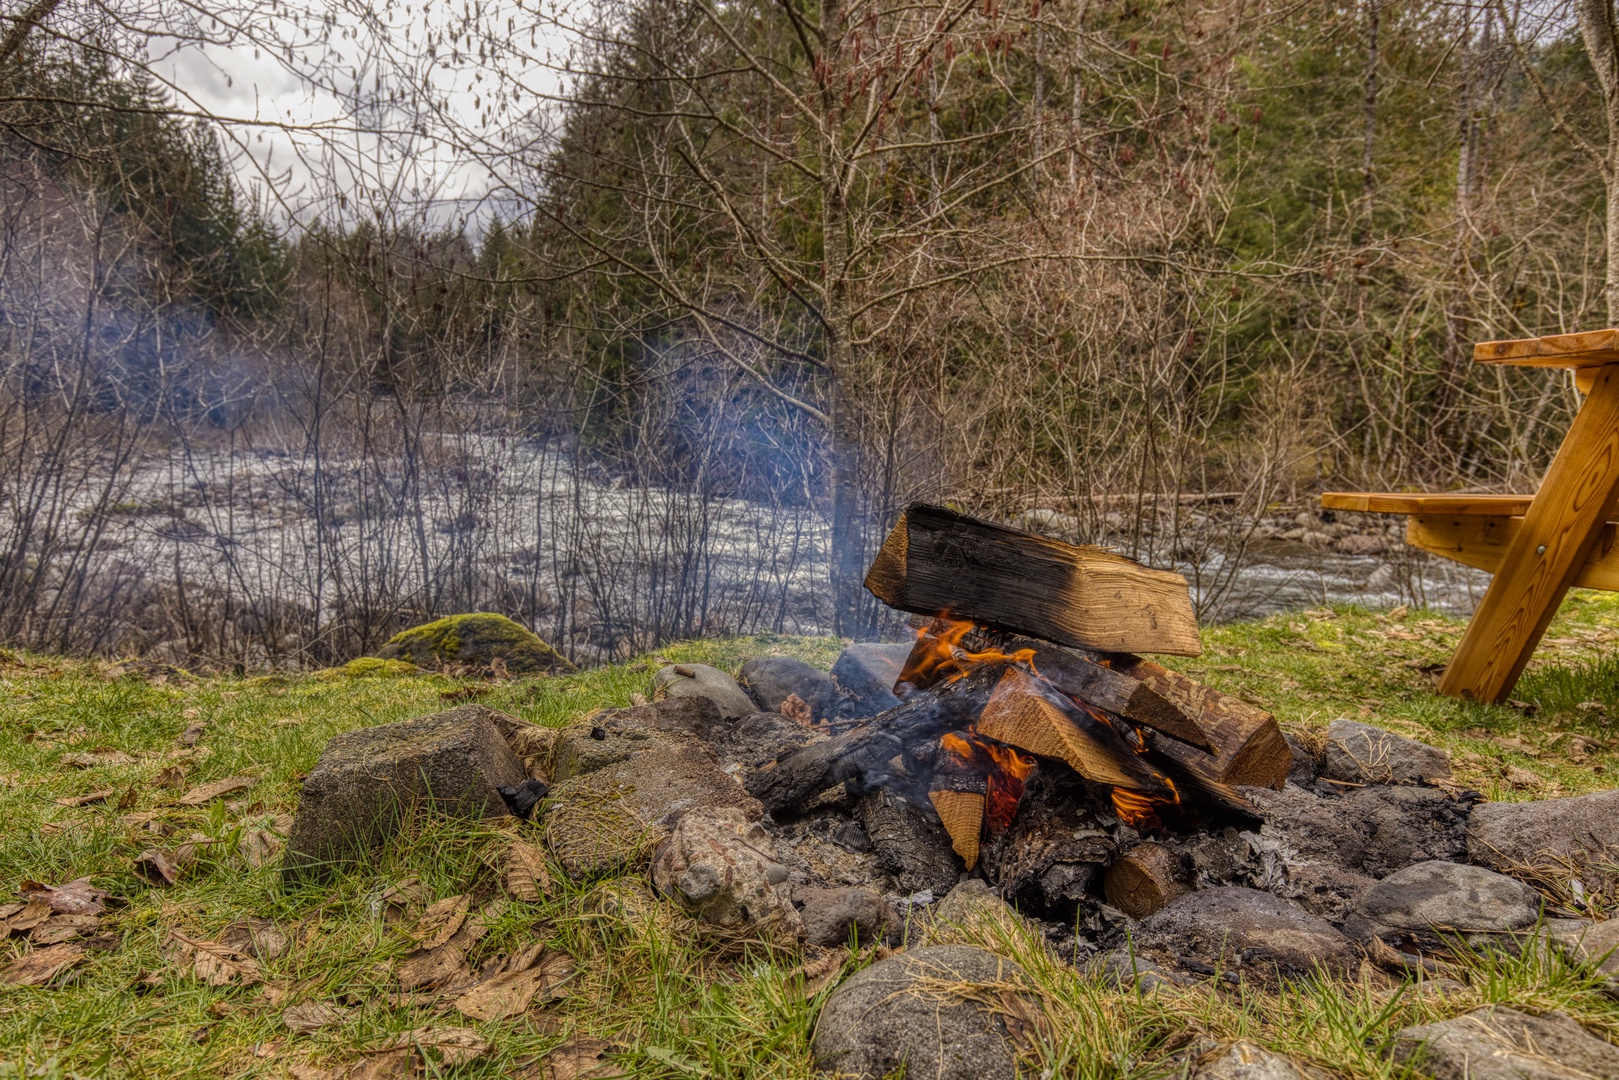 Rhododendron Vacation Rentals, Riverbend Cabin #2 - Fire pit makes for a warm and cozy evening by the river